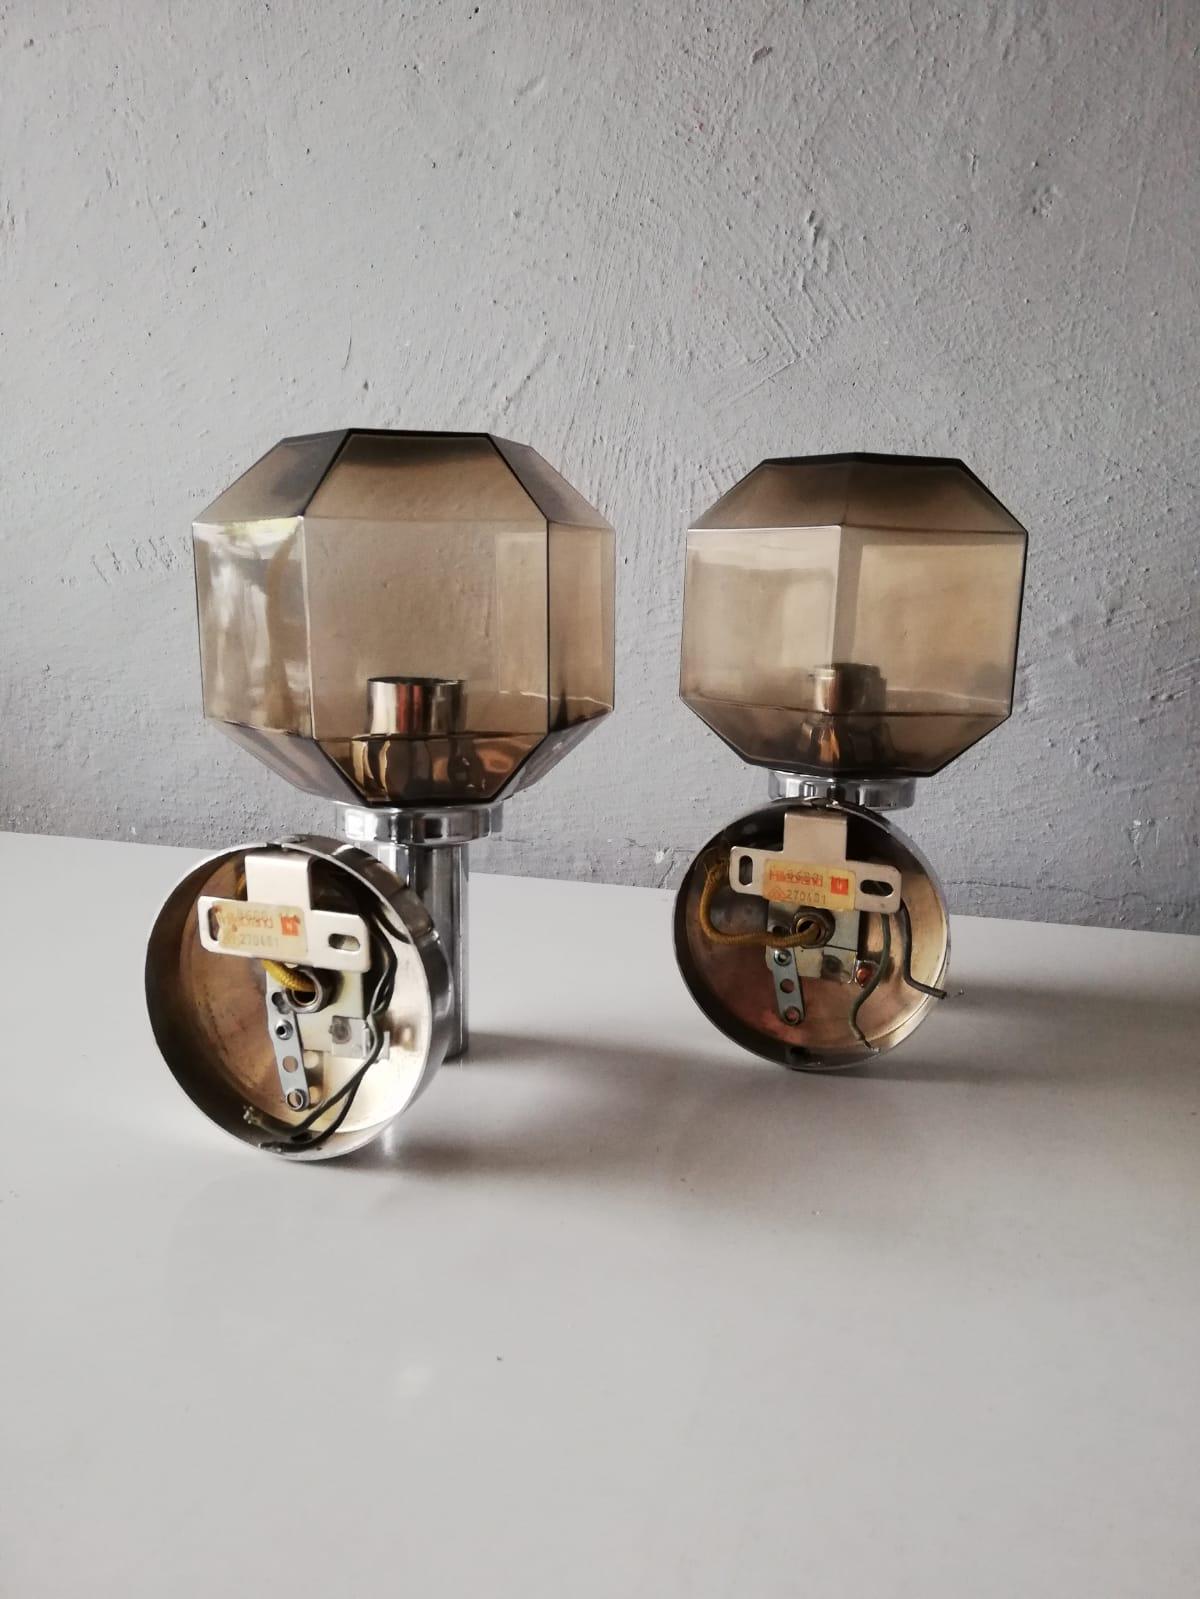 Mid-Century Modern Smoke Glass and Chrome Body Sconces by Hillebrand, 1960s Germany